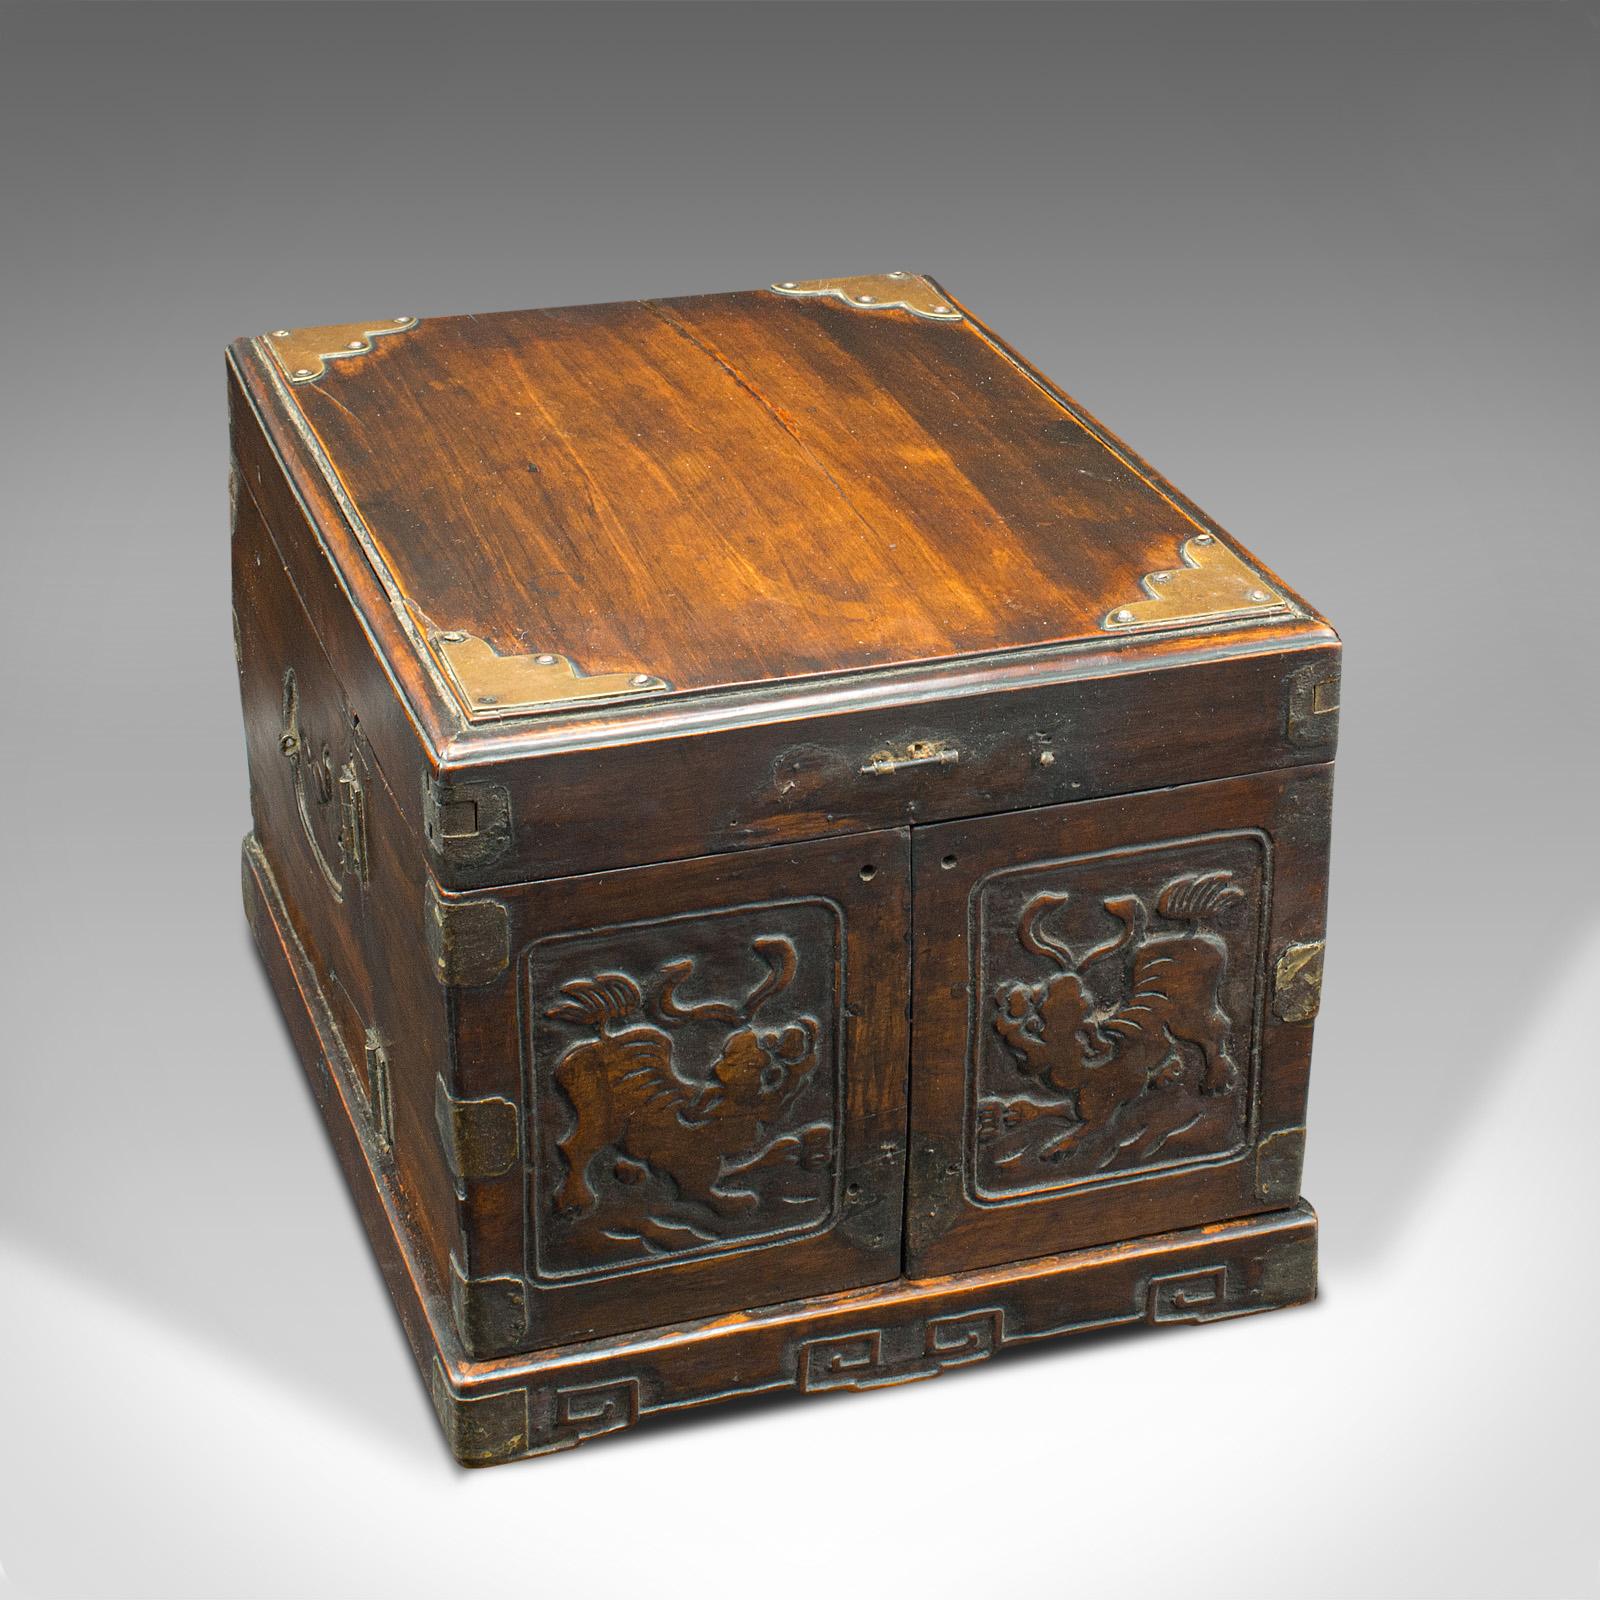 This is an antique cleric's swing-out case. A Chinese, hardwood travelling box, dating to the late Victorian period, circa 1890.

Charmingly provincial box, presented in original time-worn condition
Displays a desirable aged patina